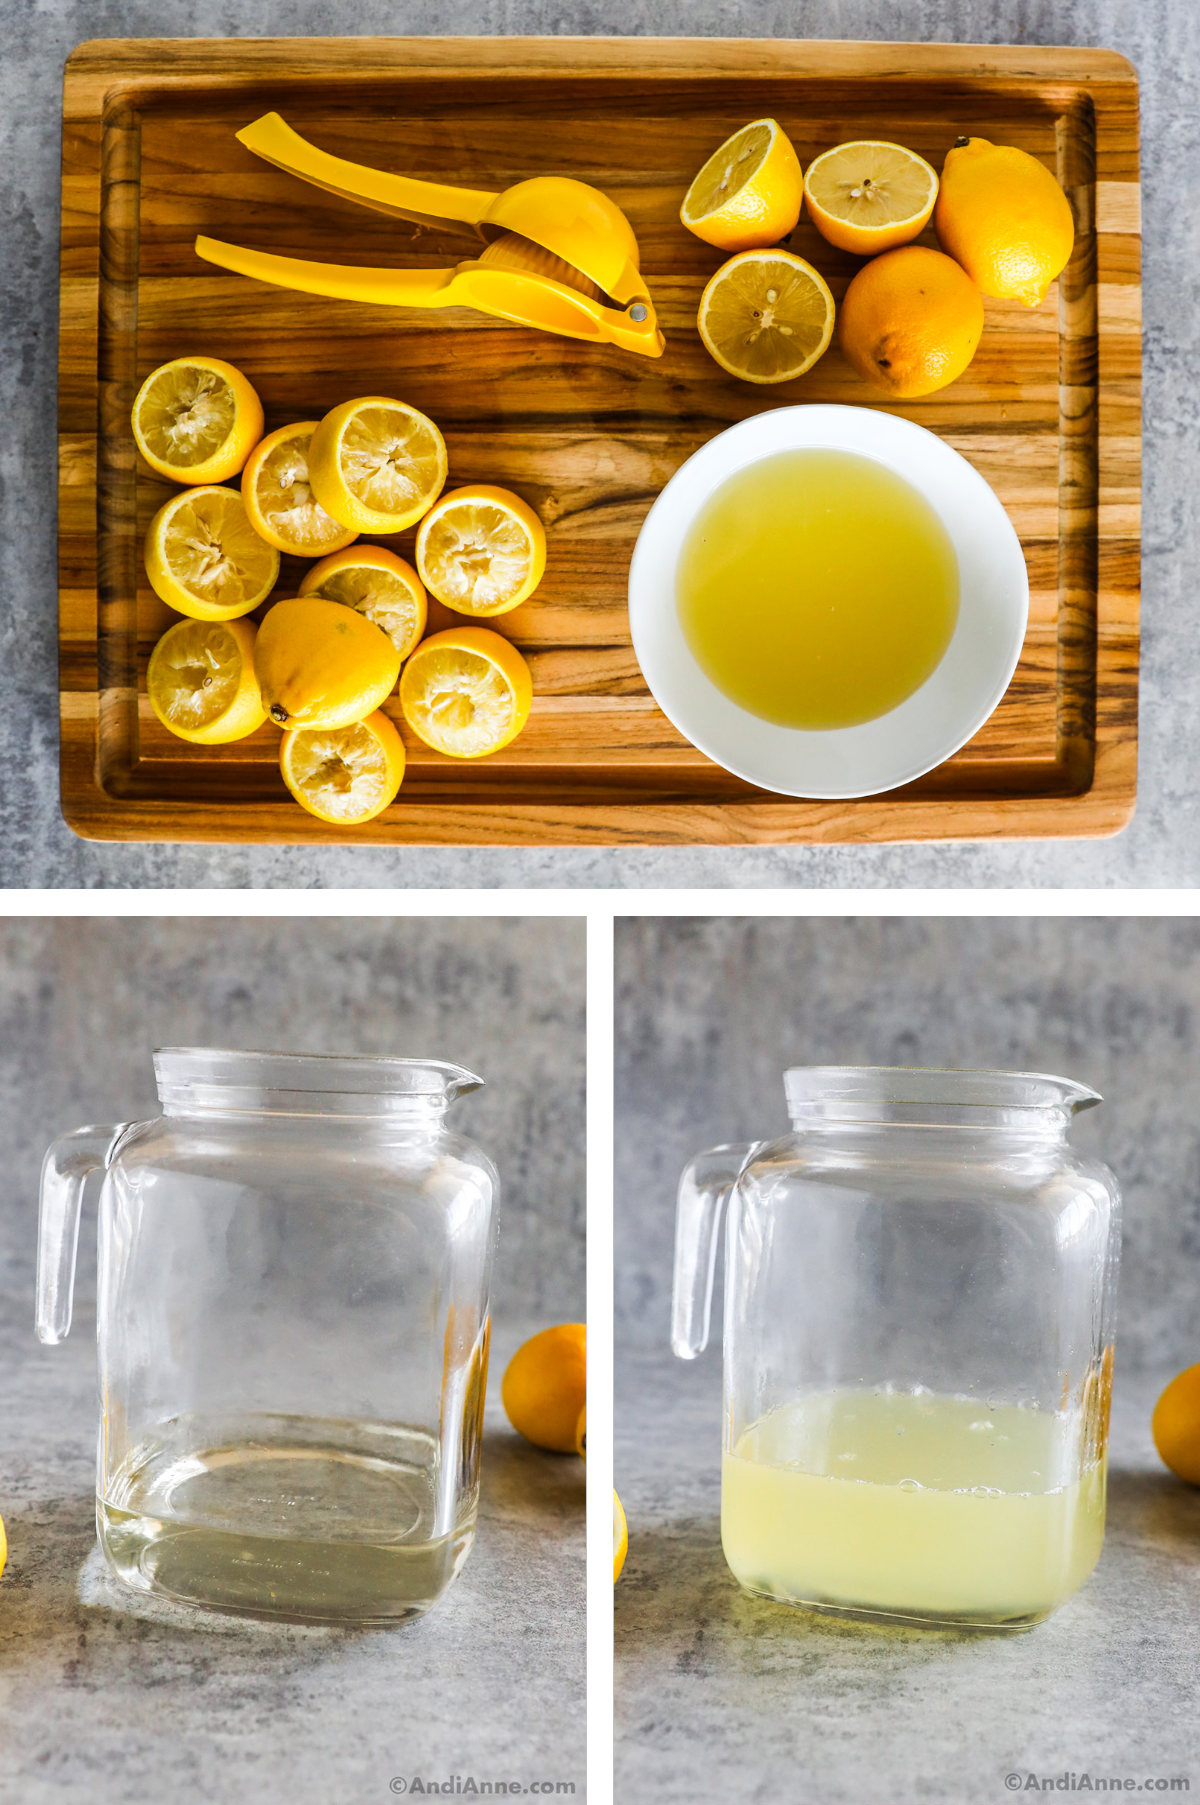 Three overhead images in one: 1. Cutting board with squeezed lemons, lemon juice in a bowl and a hand juicer. 2. Pitcher with sugar water. 3. Pitcher with lemon juice added to sugar water. 